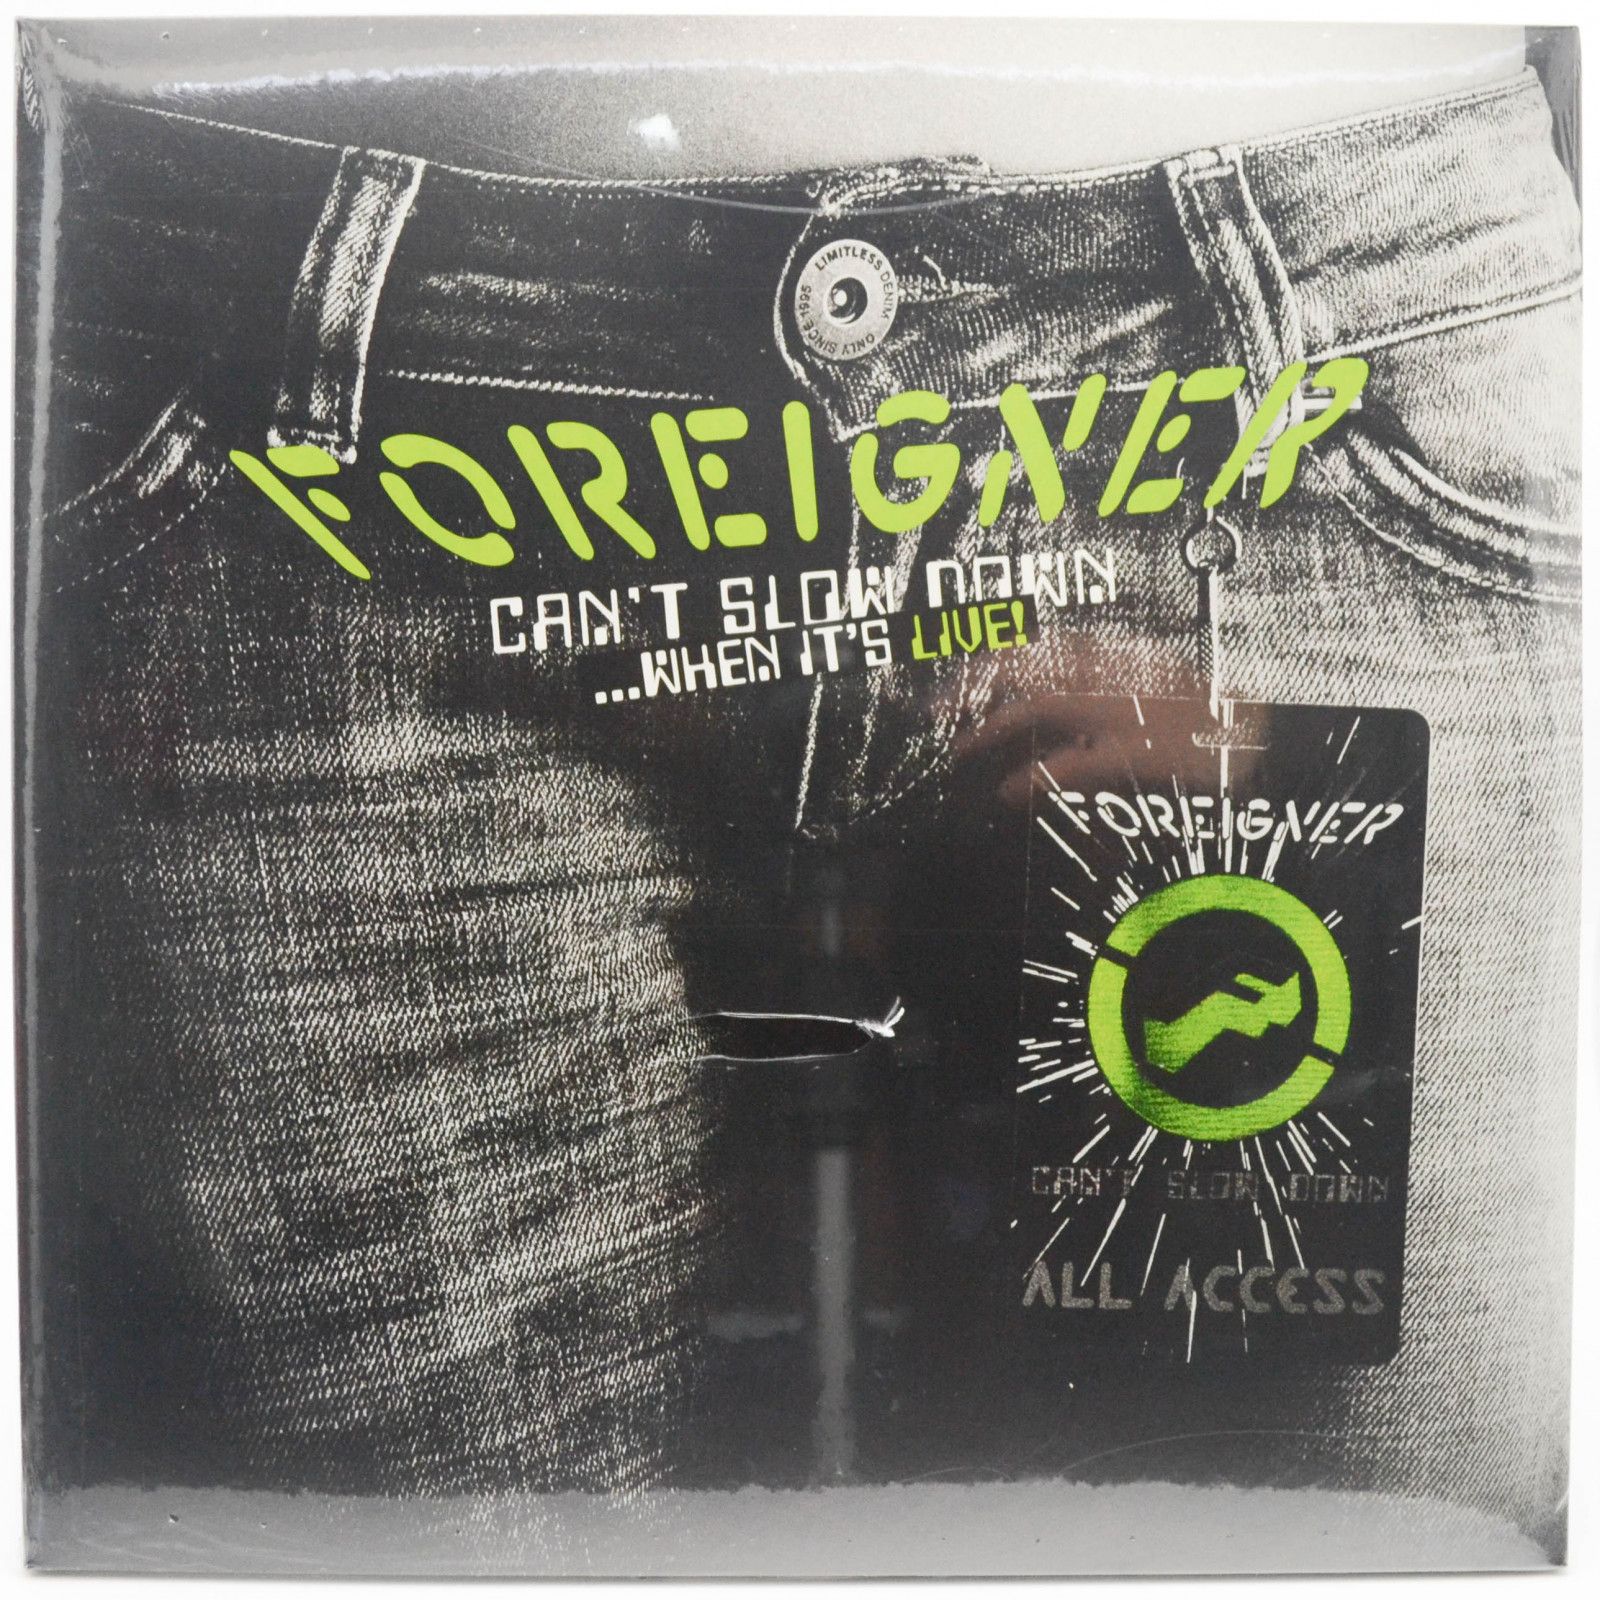 Foreigner — Can't Slow Down...When It's Live! (2LP), 2014